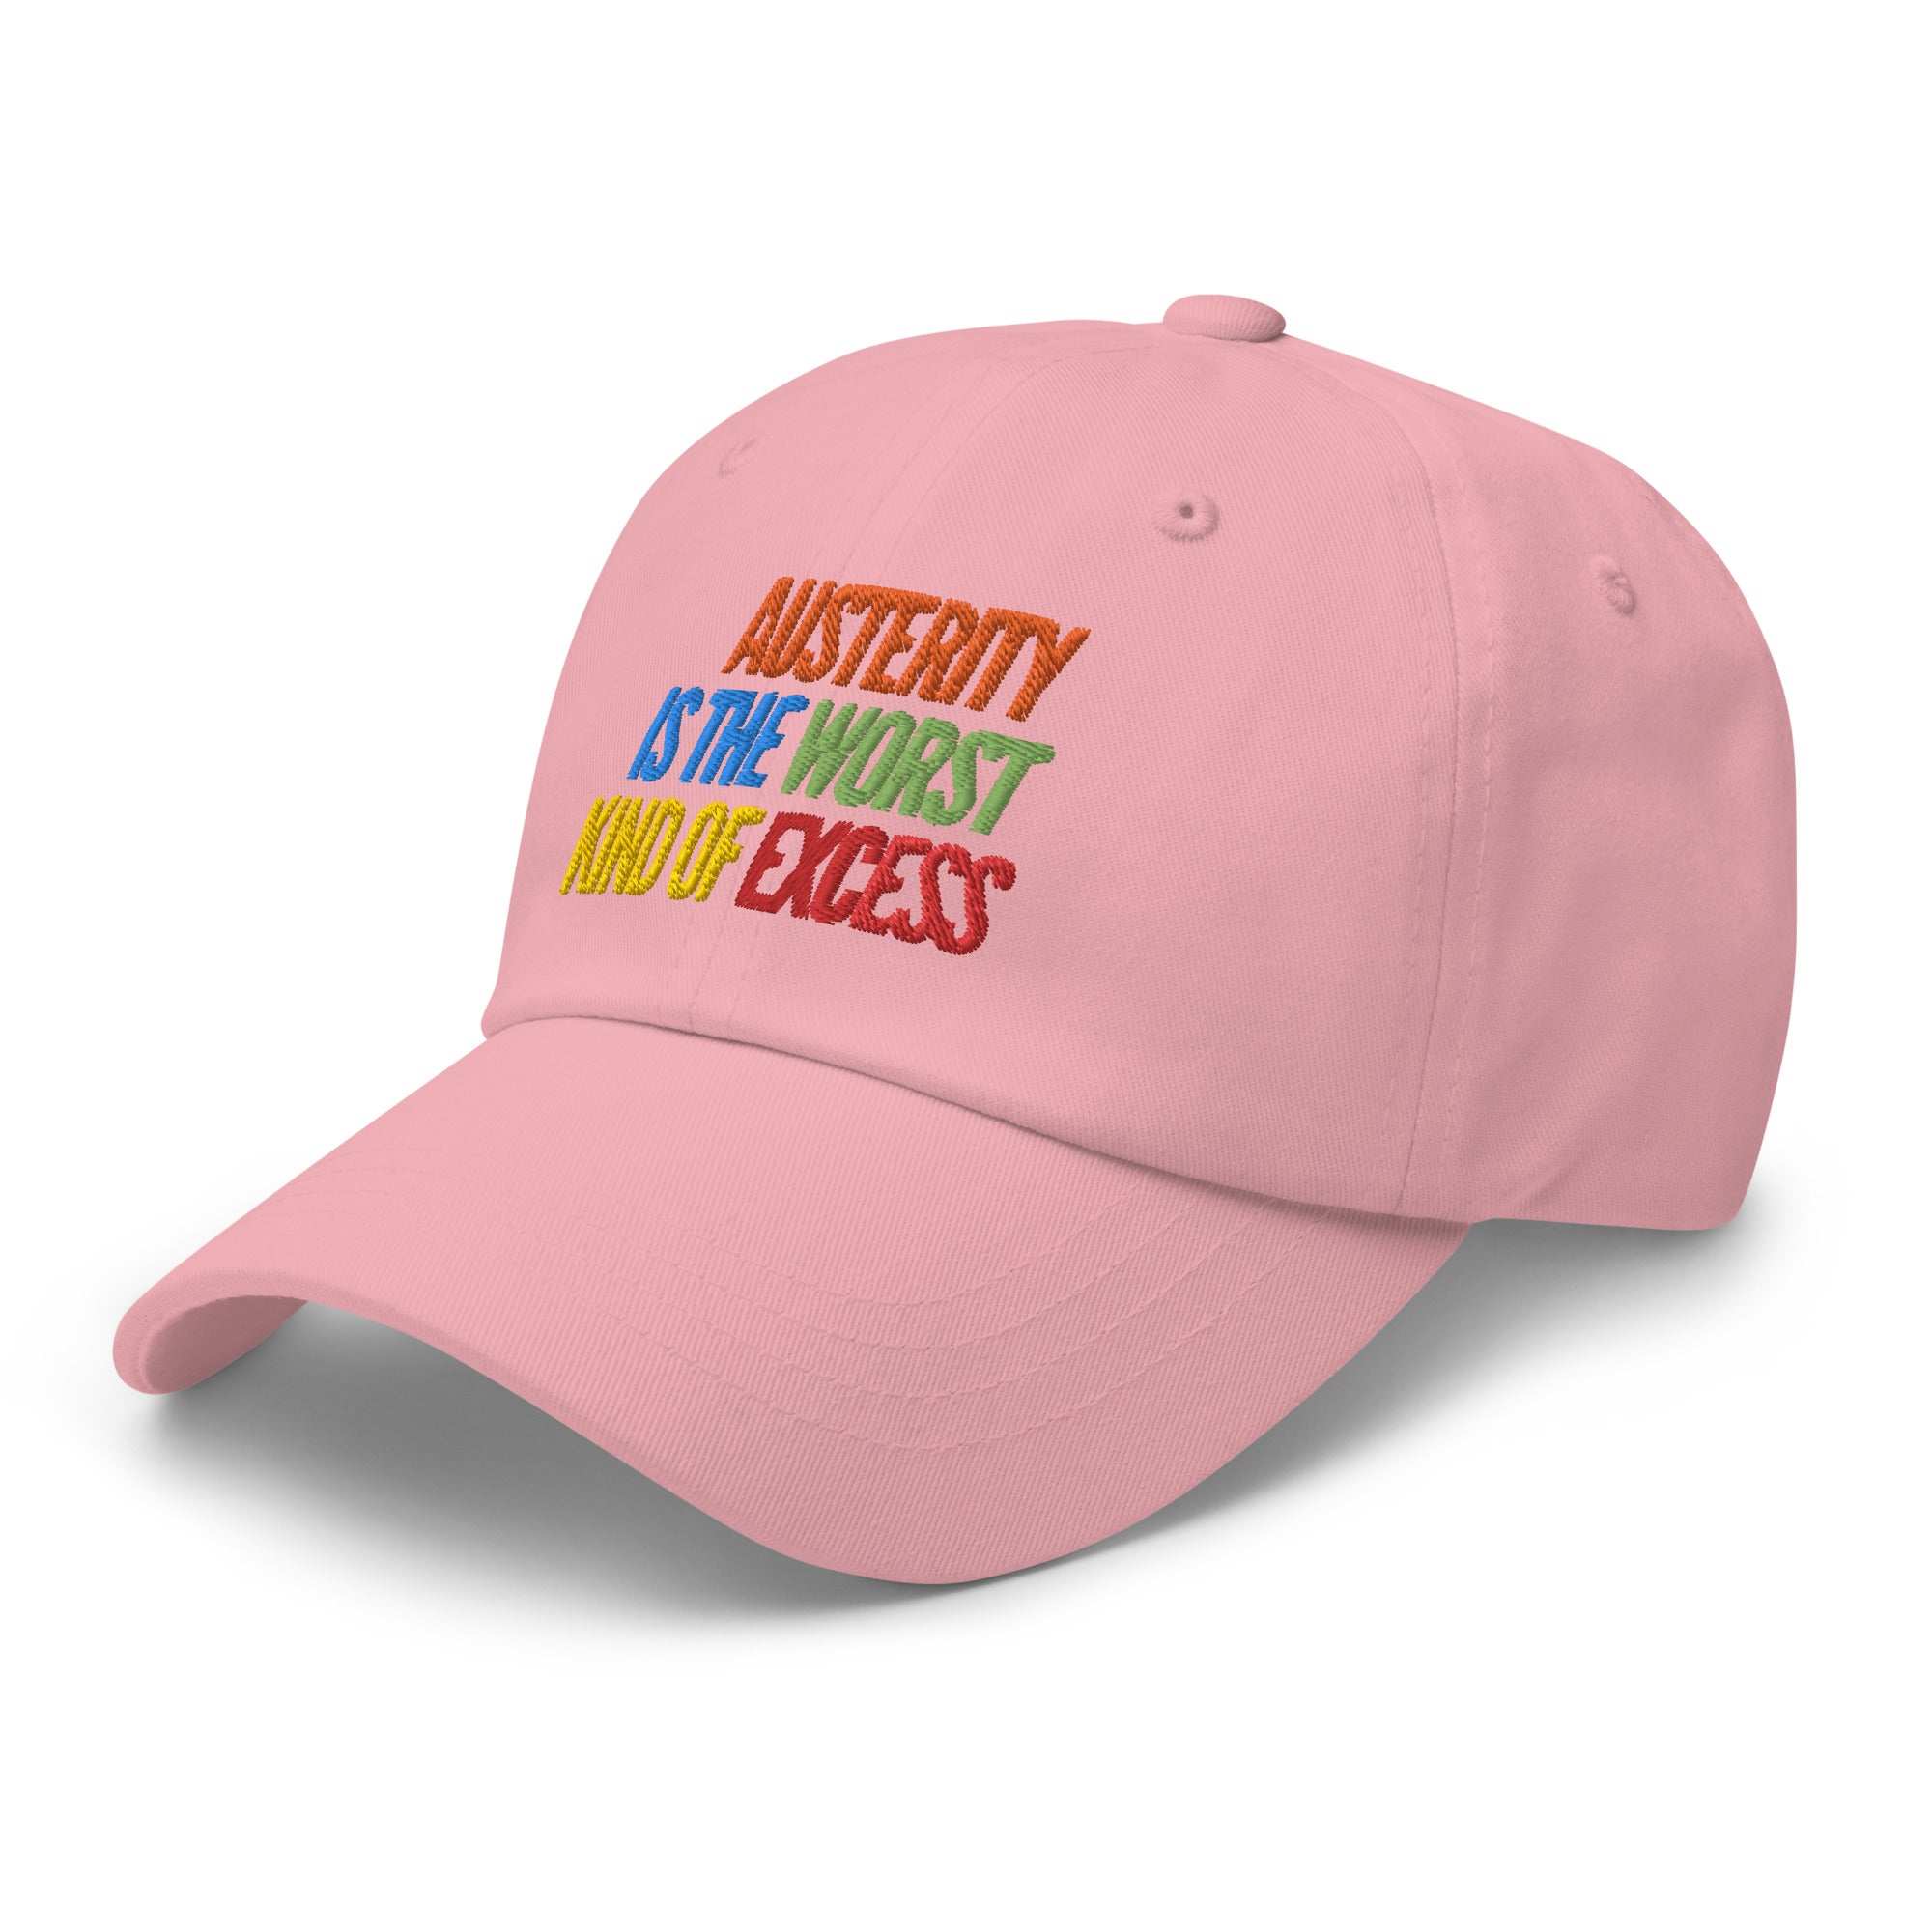 Austerity is the Worst Kind of Excess Hat